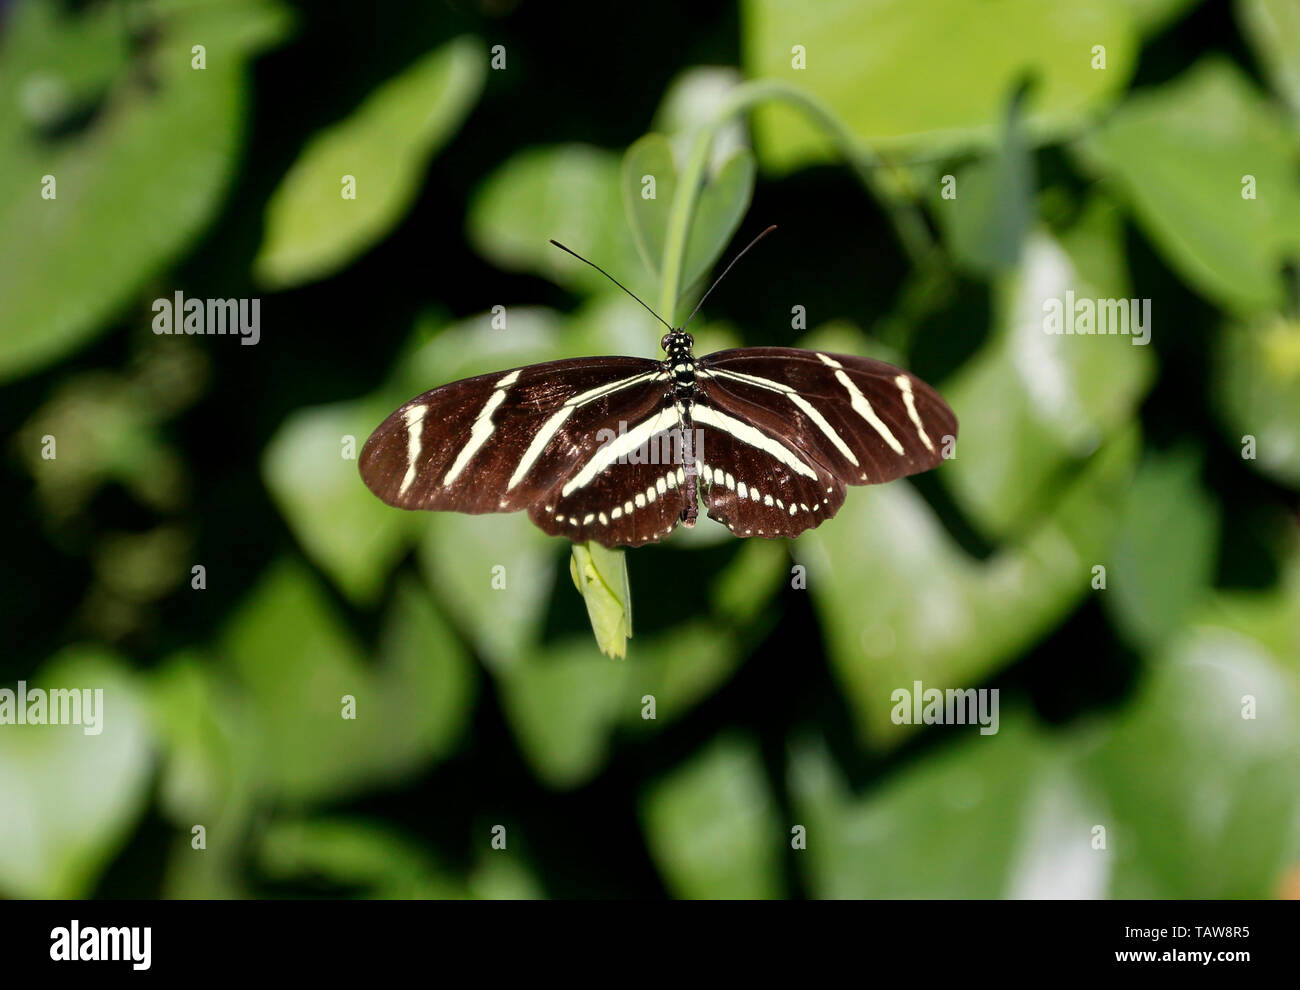 Los Angeles, USA. 27th May, 2019. A butterfly rests on leaves at the Butterfly Pavilion of the Natural History Museum of Los Angeles County in Los Angeles, the United States, May 27, 2019. The butterfly exhibition at the Natural History Museum of Los Angeles County showcases hundreds of butterflies and the plants that surround them. Credit: Li Ying/Xinhua/Alamy Live News Stock Photo